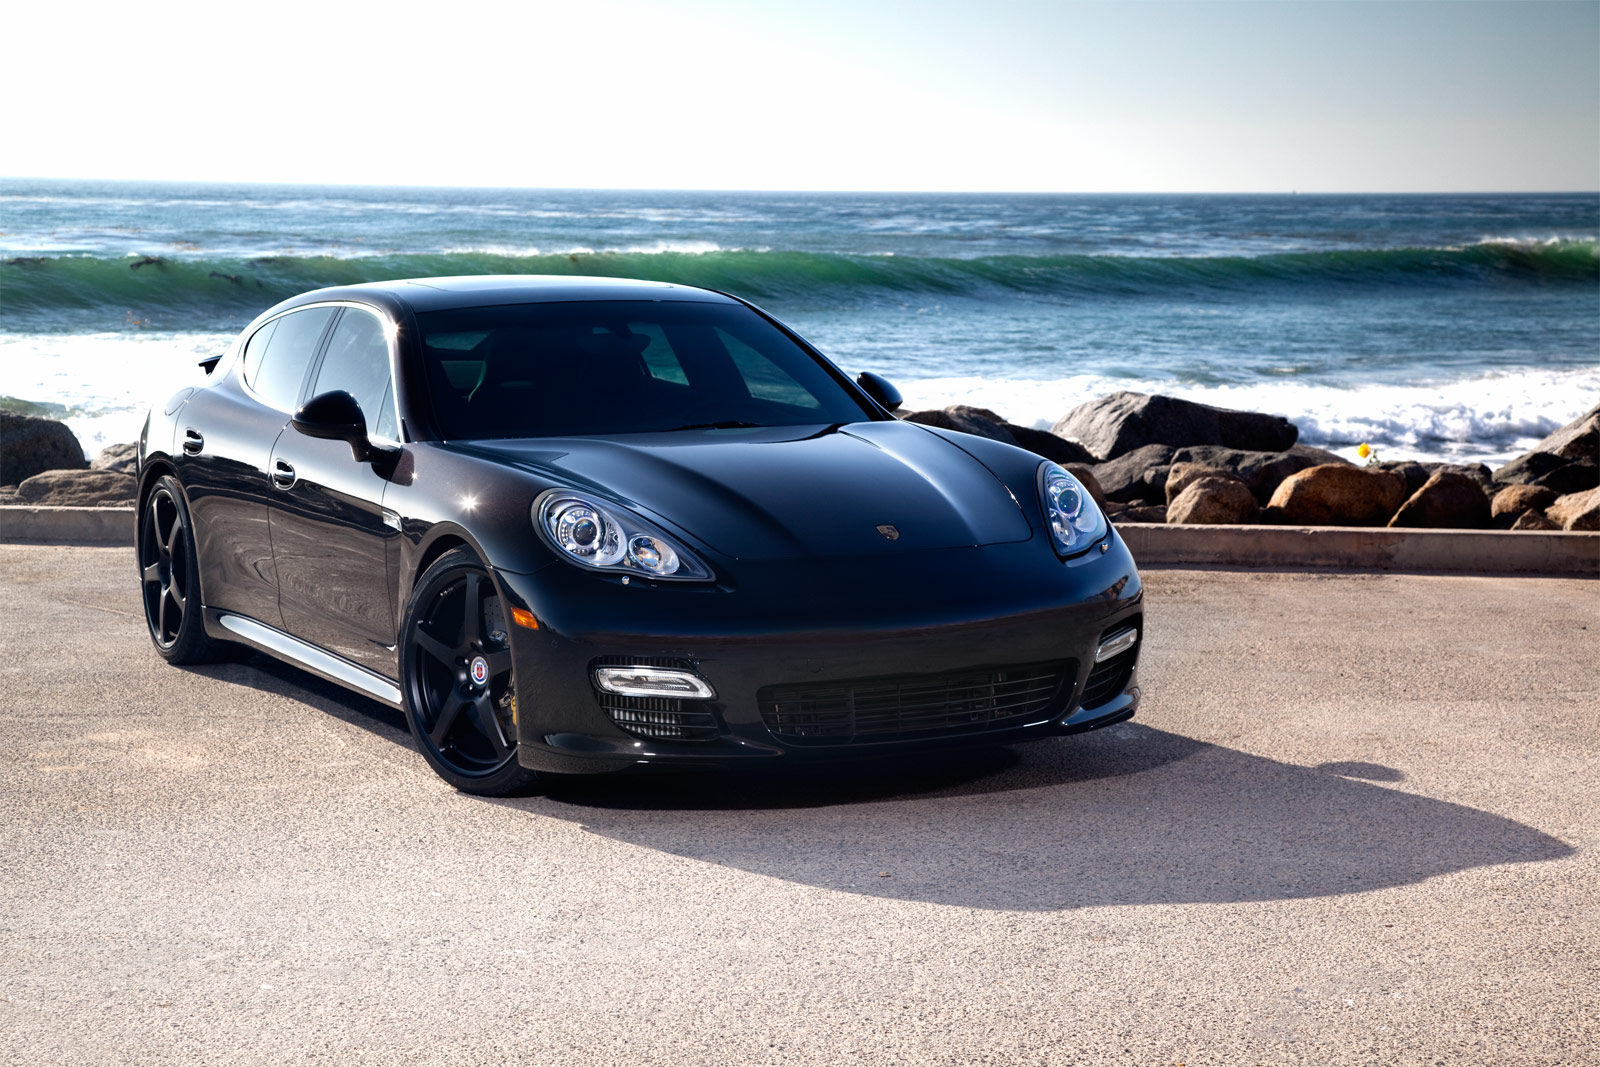 Cars News and Images: New Porsche Panamera